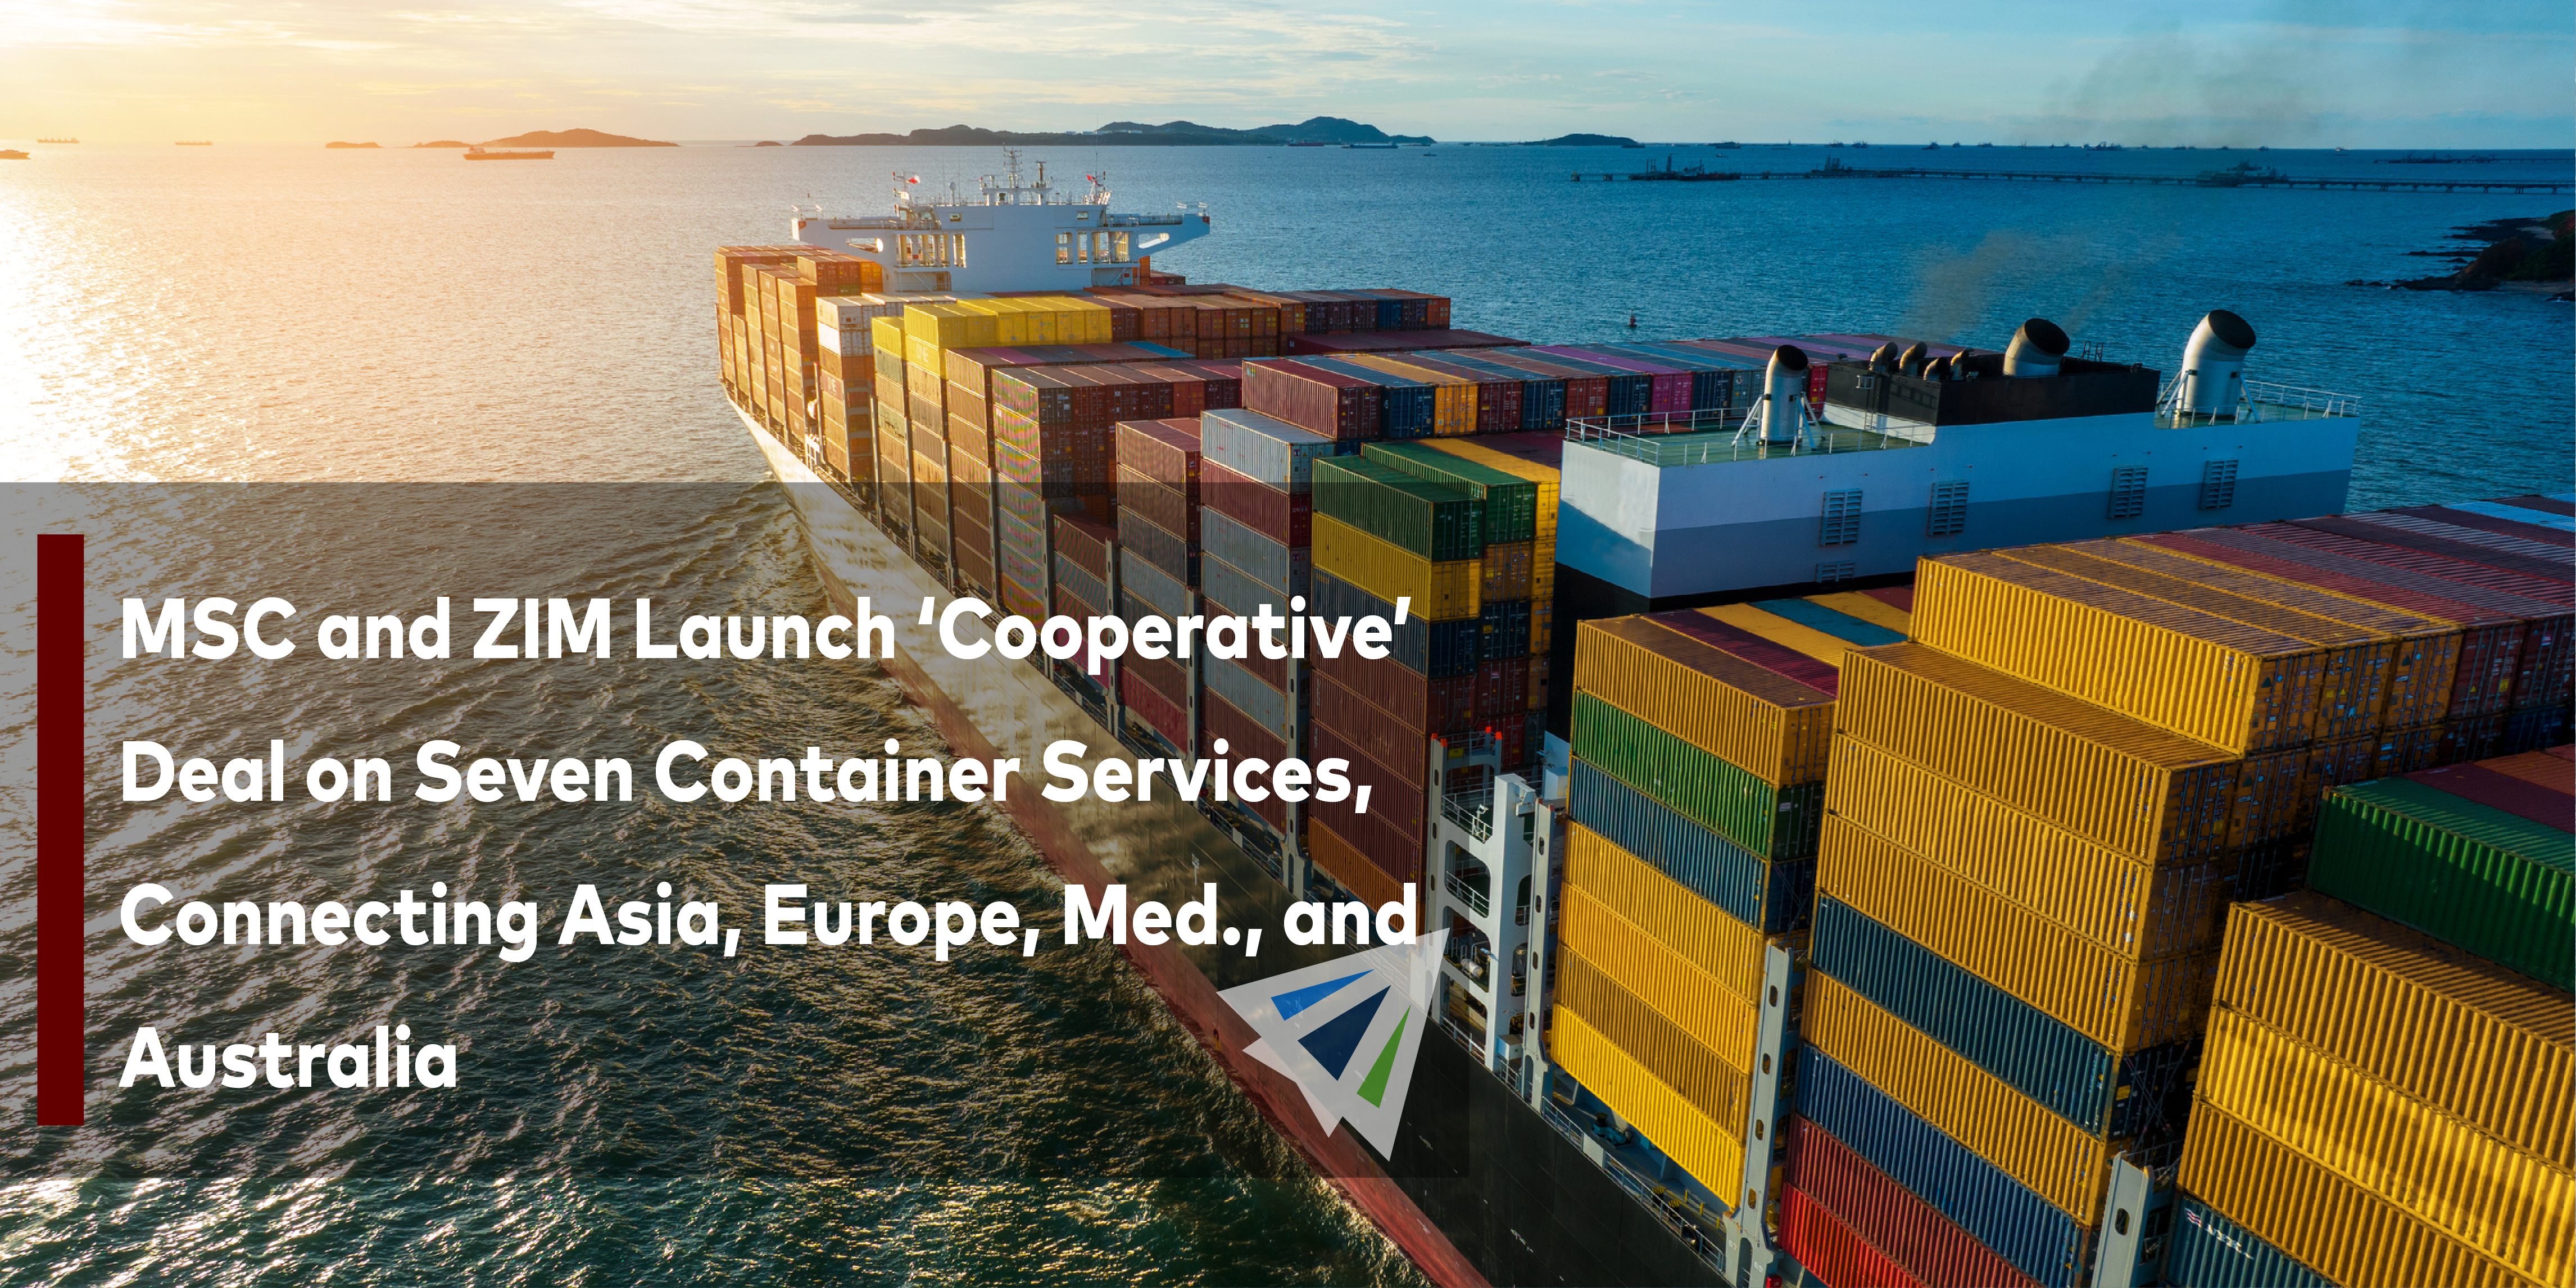 MSC and ZIM Launch ‘Cooperative’ Deal on Seven Container Services, Connecting Asia, Europe, Med., and Australia